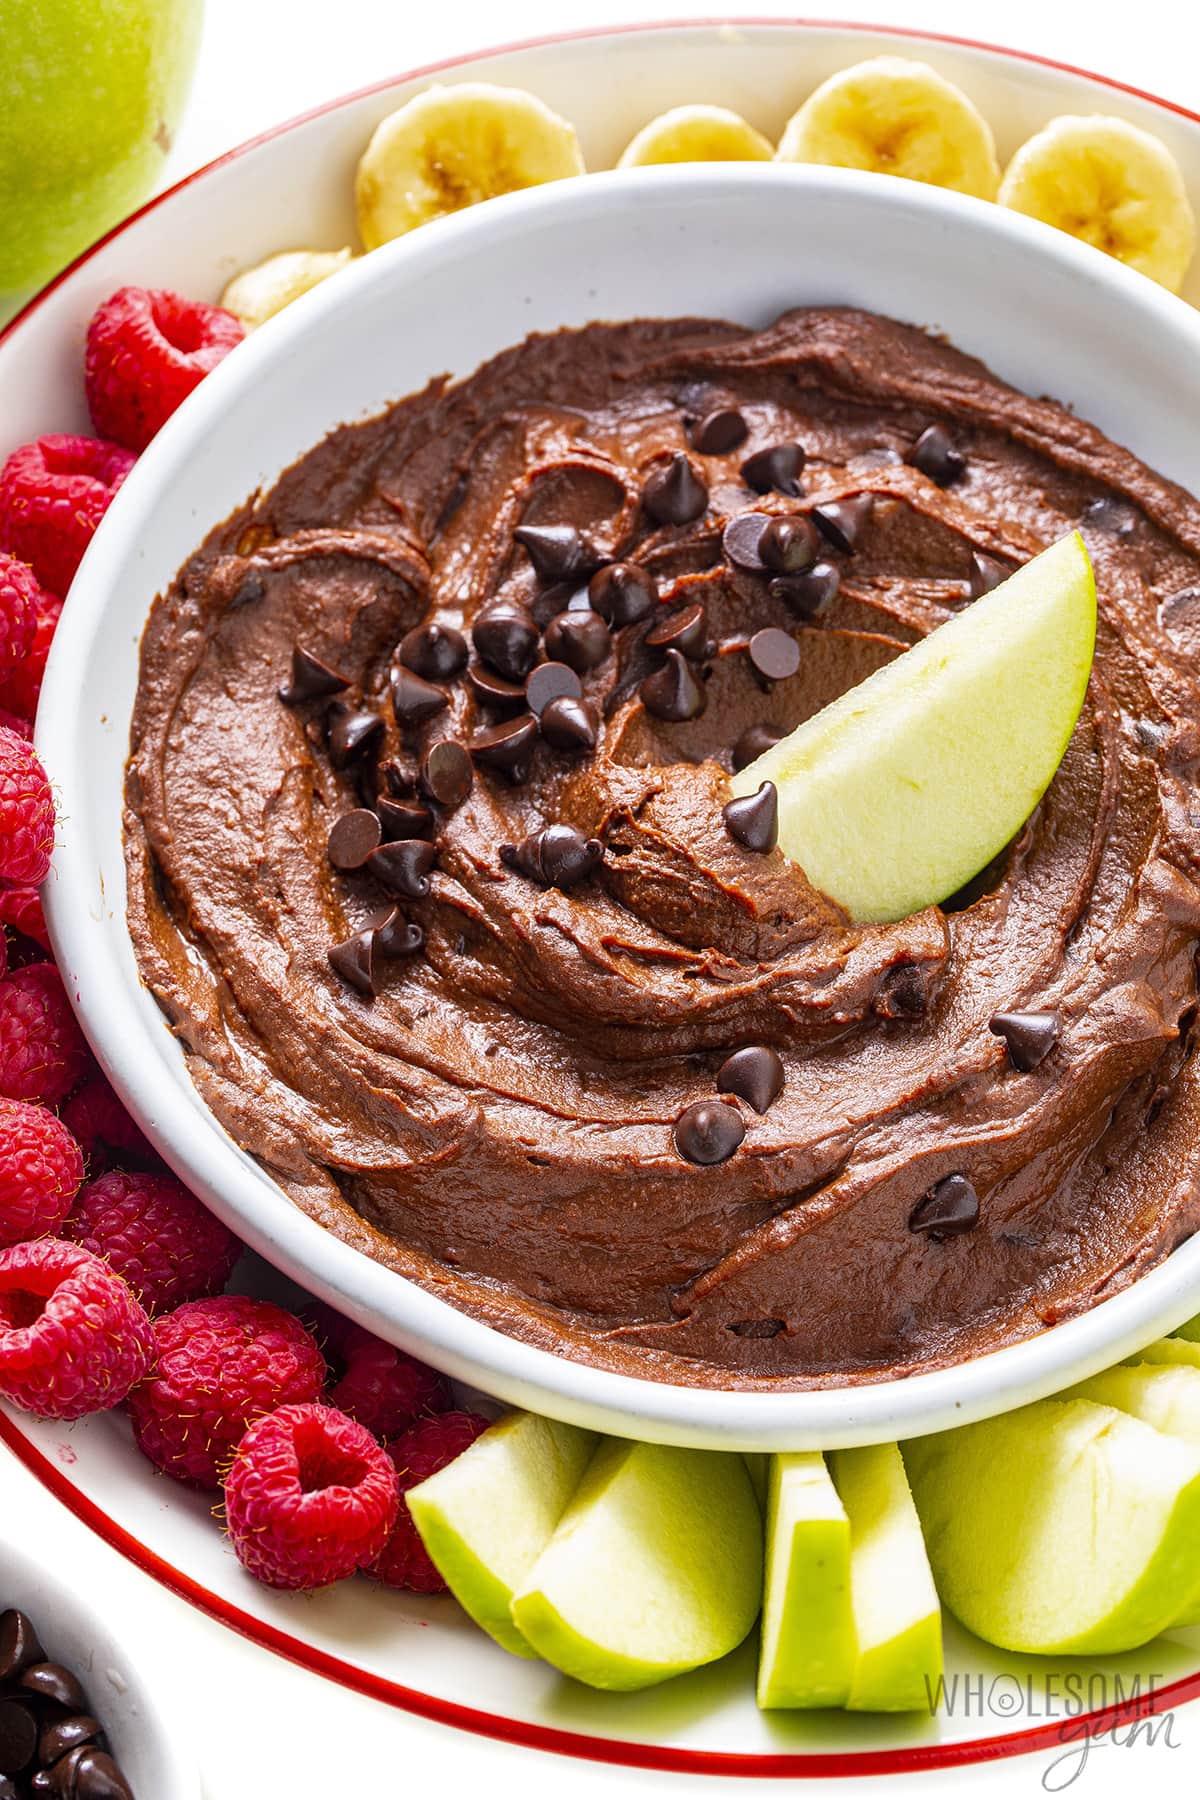 Dark chocolate hummus in a bowl with a green apple wedge.